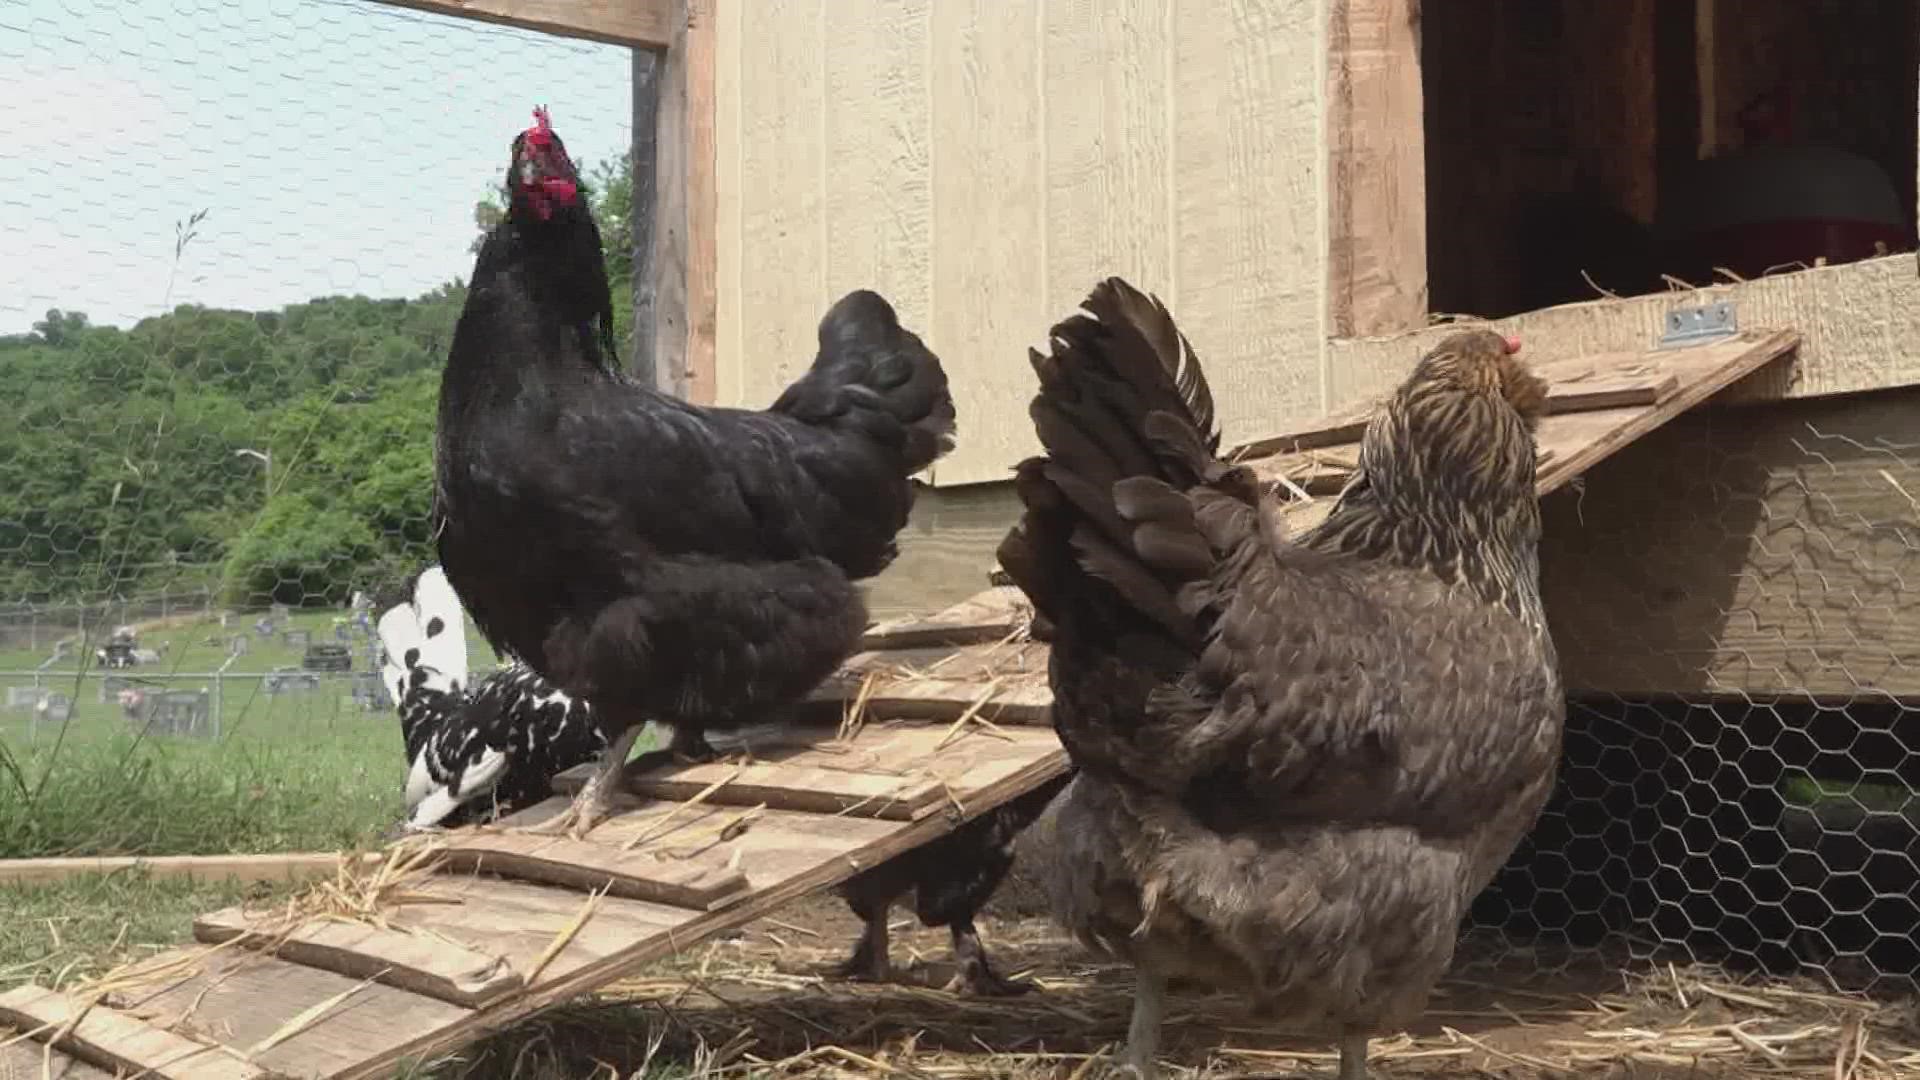 The school just got a STEM designation for hands-on learning classes, like one that teaches chicken farming.